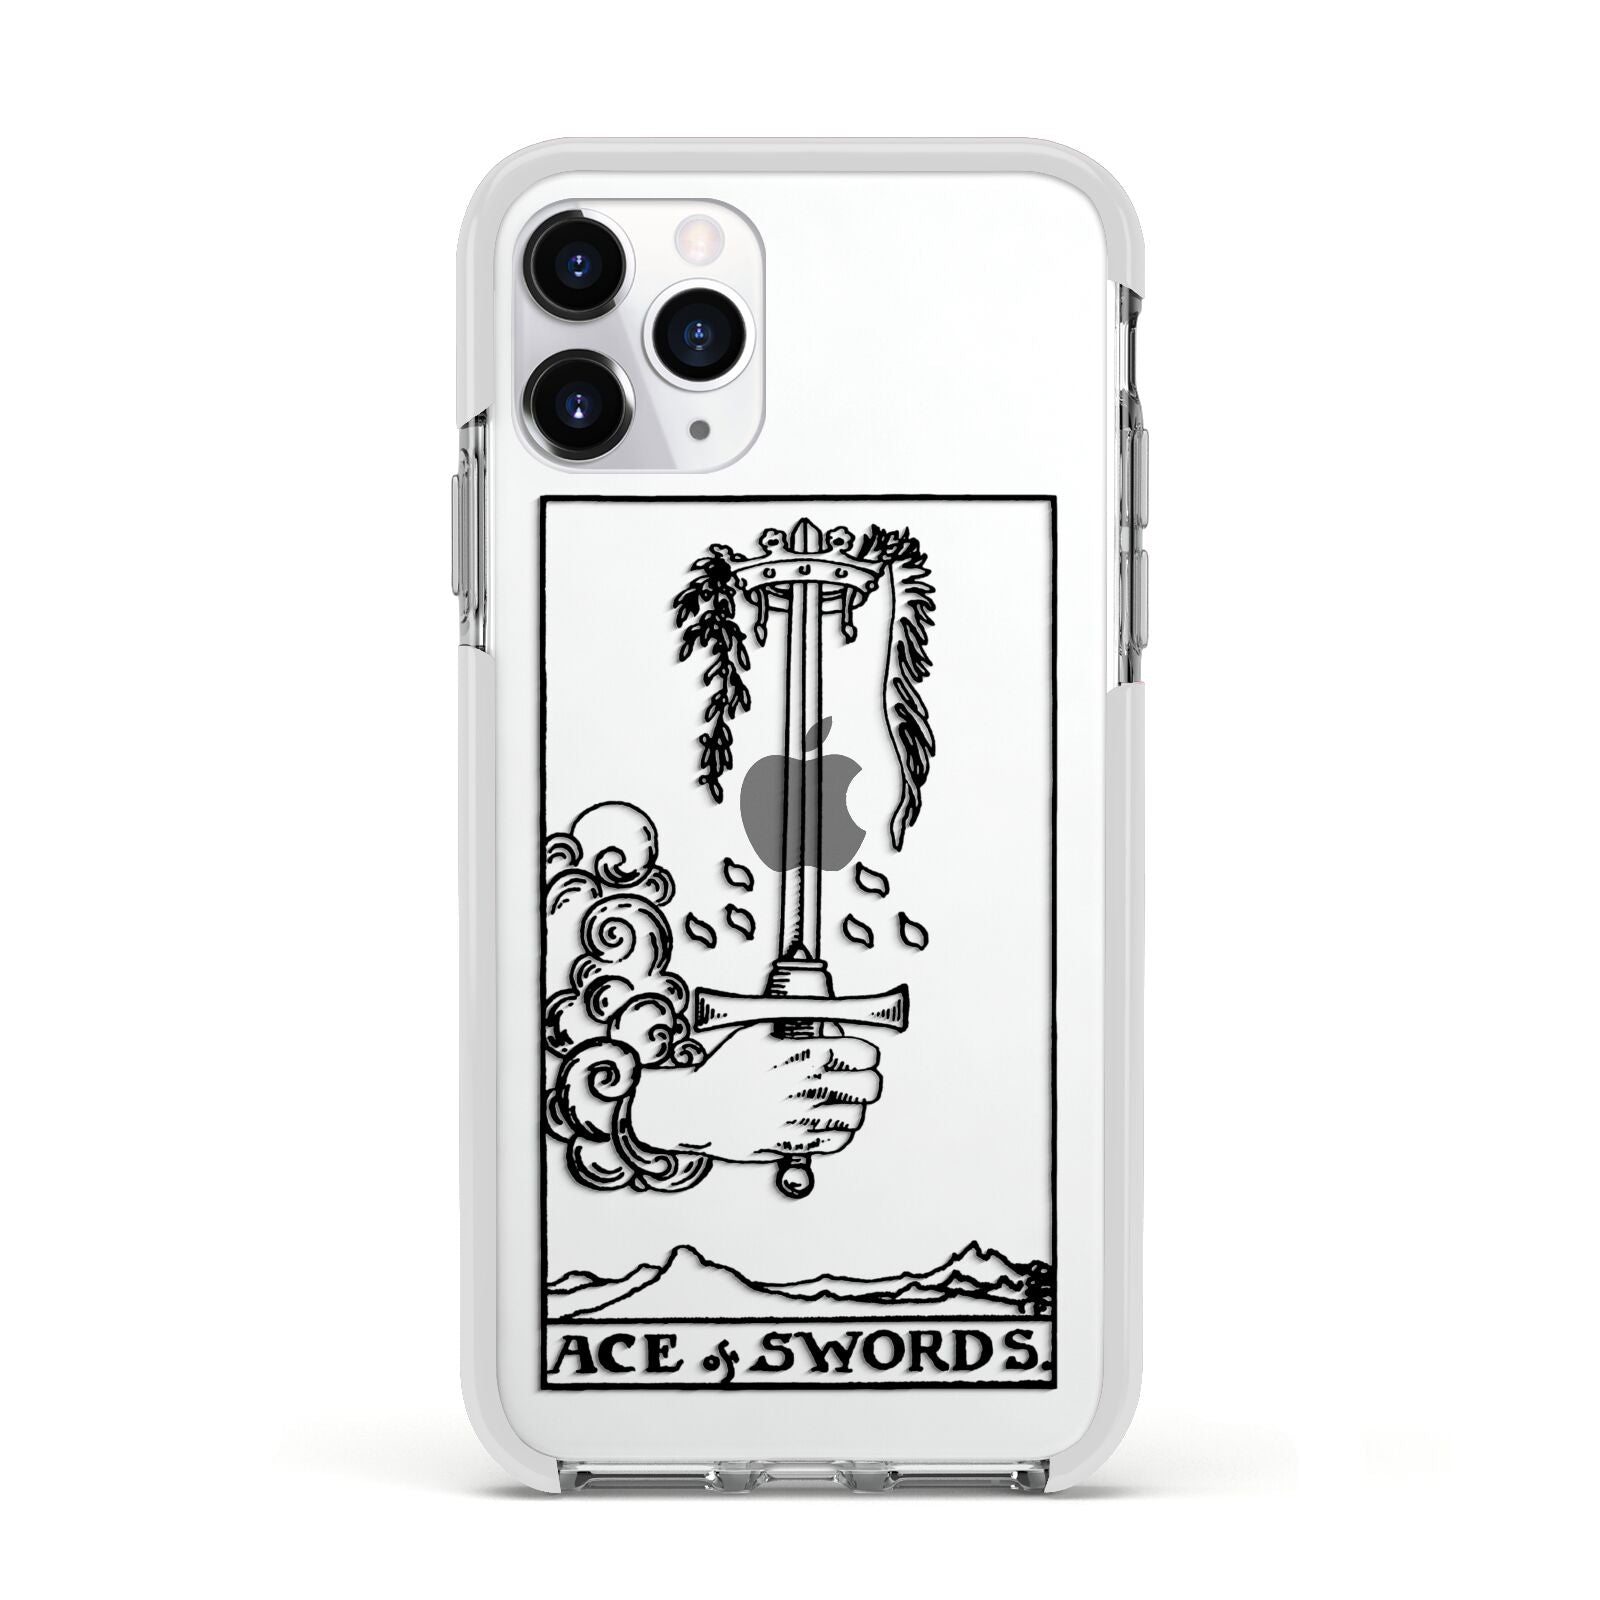 Ace of Swords Monochrome Apple iPhone 11 Pro in Silver with White Impact Case